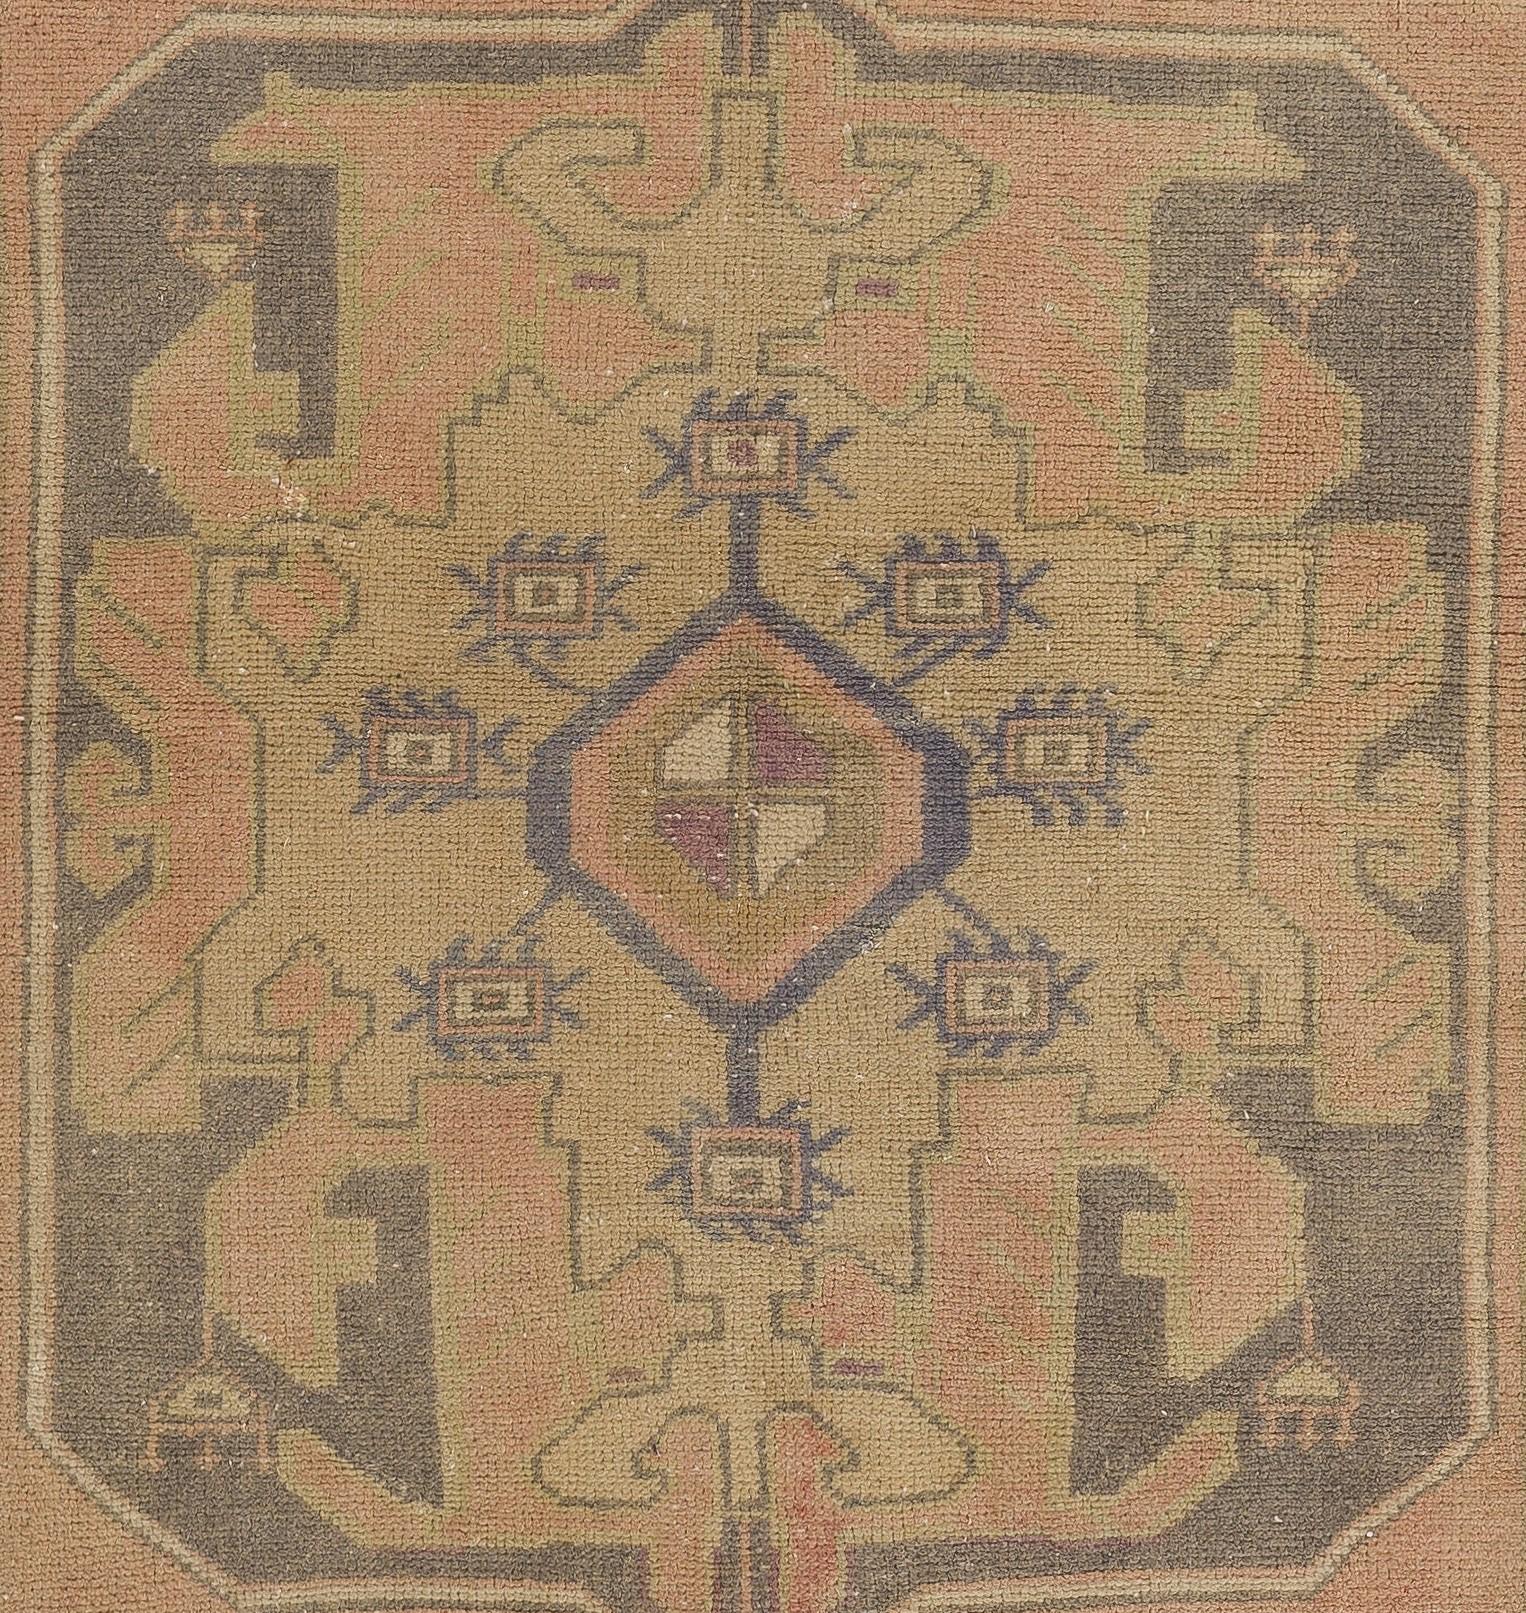 Hand-Knotted 4x8.3 Ft One-of-a-Kind Vintage Turkish Oushak Rug in Soft Colors, All Wool For Sale